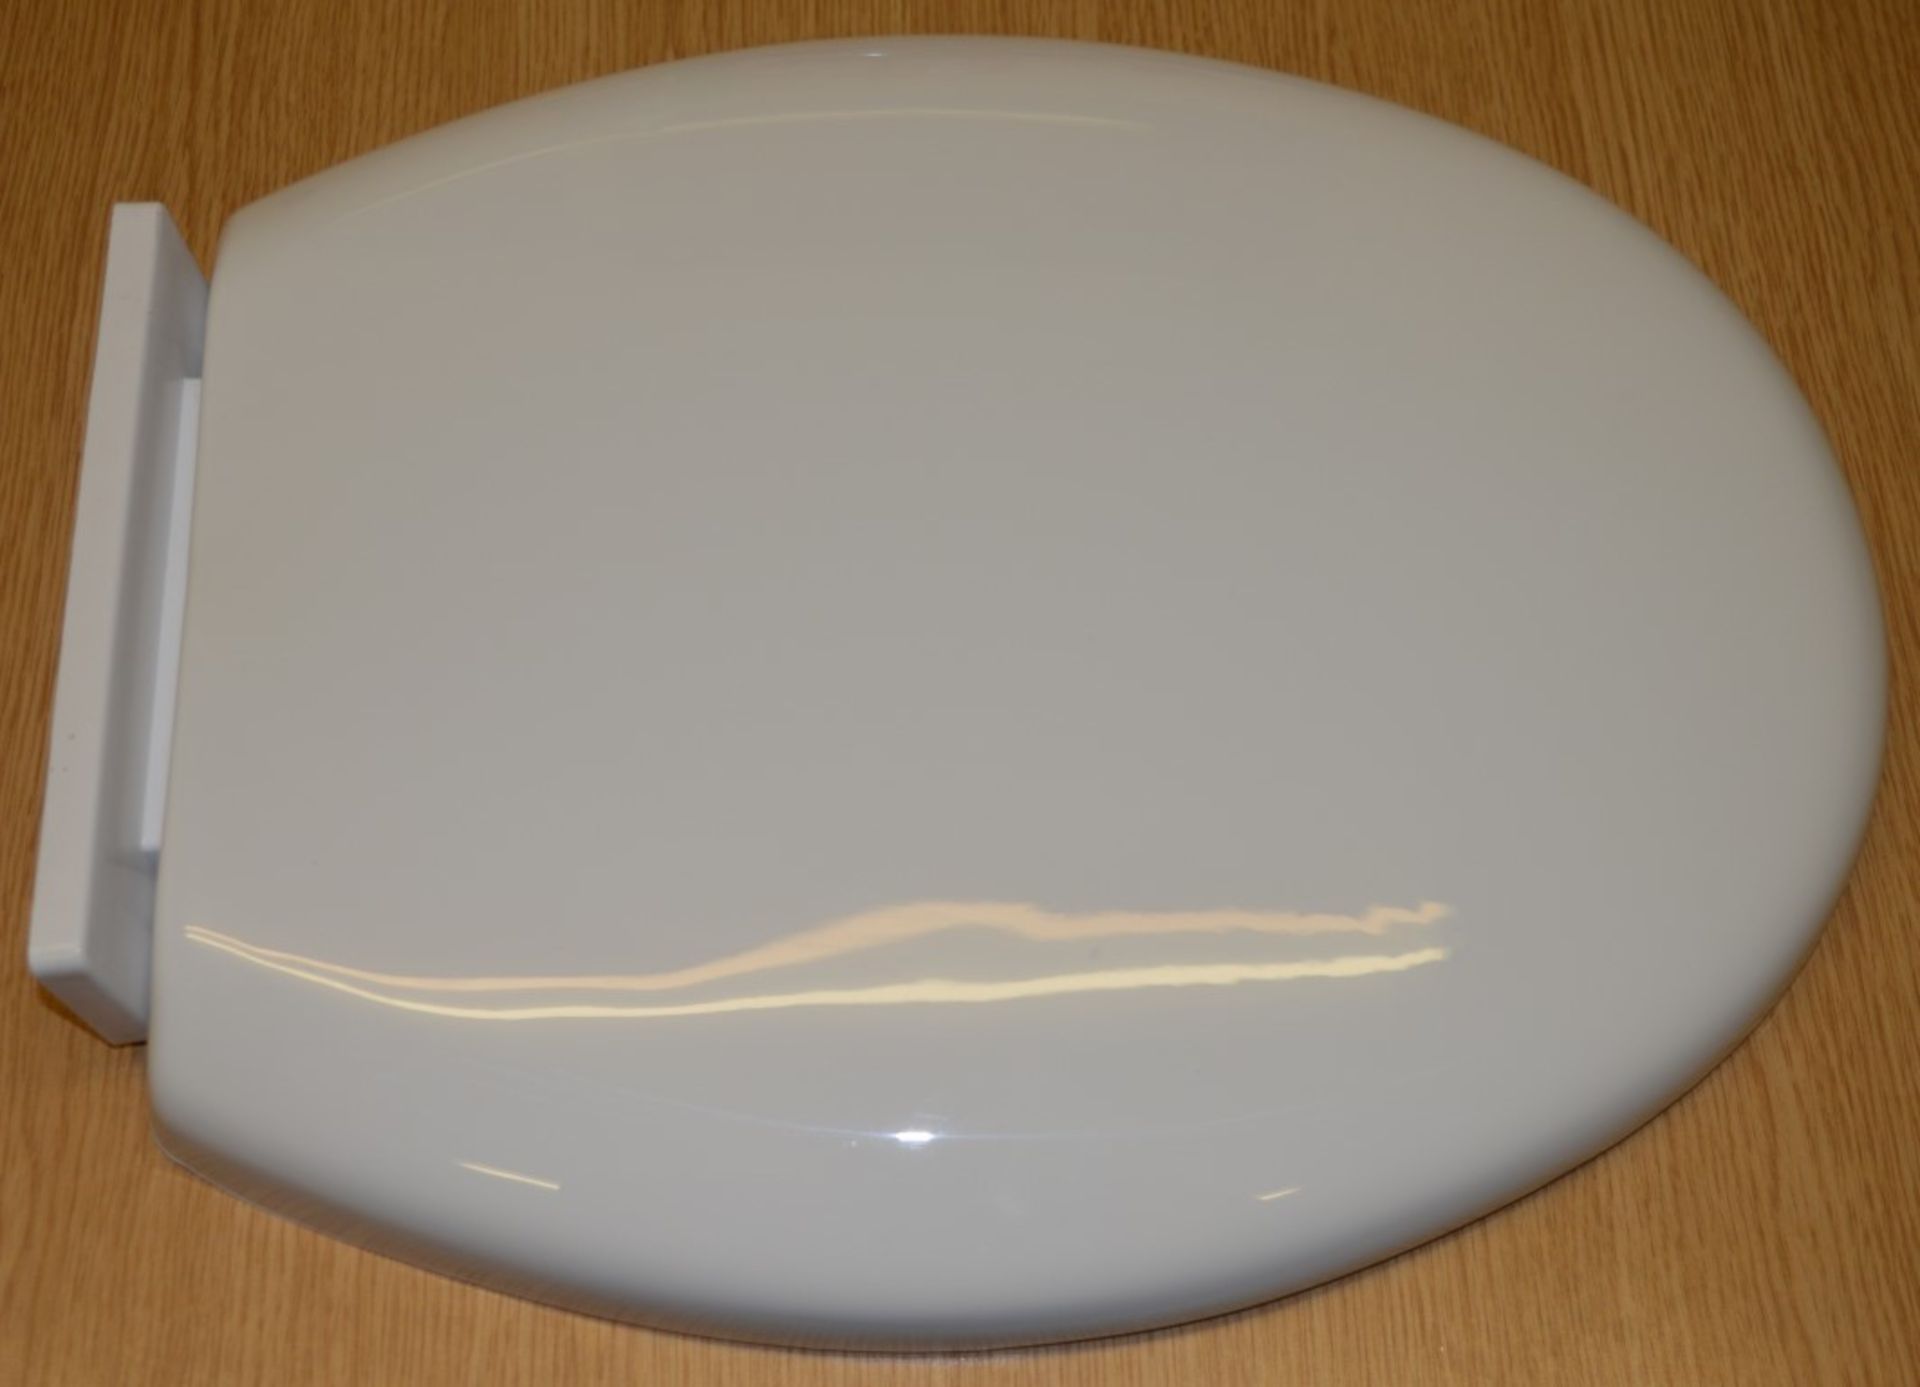 6 x Soft Close COMFORT Toilet Seats - Brand New Boxed Stock - CL034 - Ideal For Resale - Vogue - Image 6 of 7